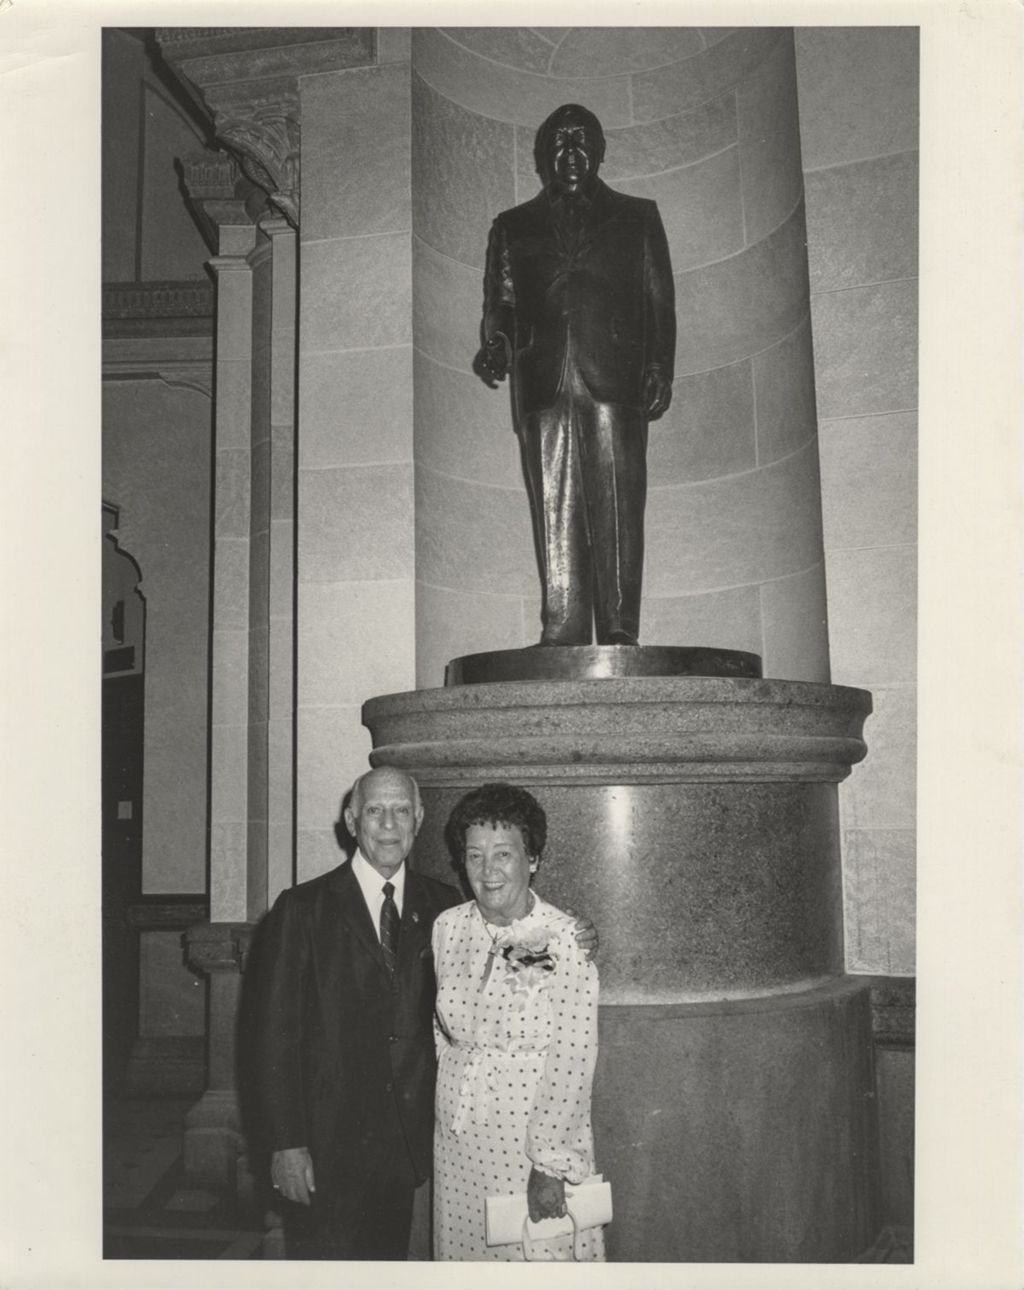 Judge Marovitz and Eleanor Daley in front of the Richard J. Daley statue